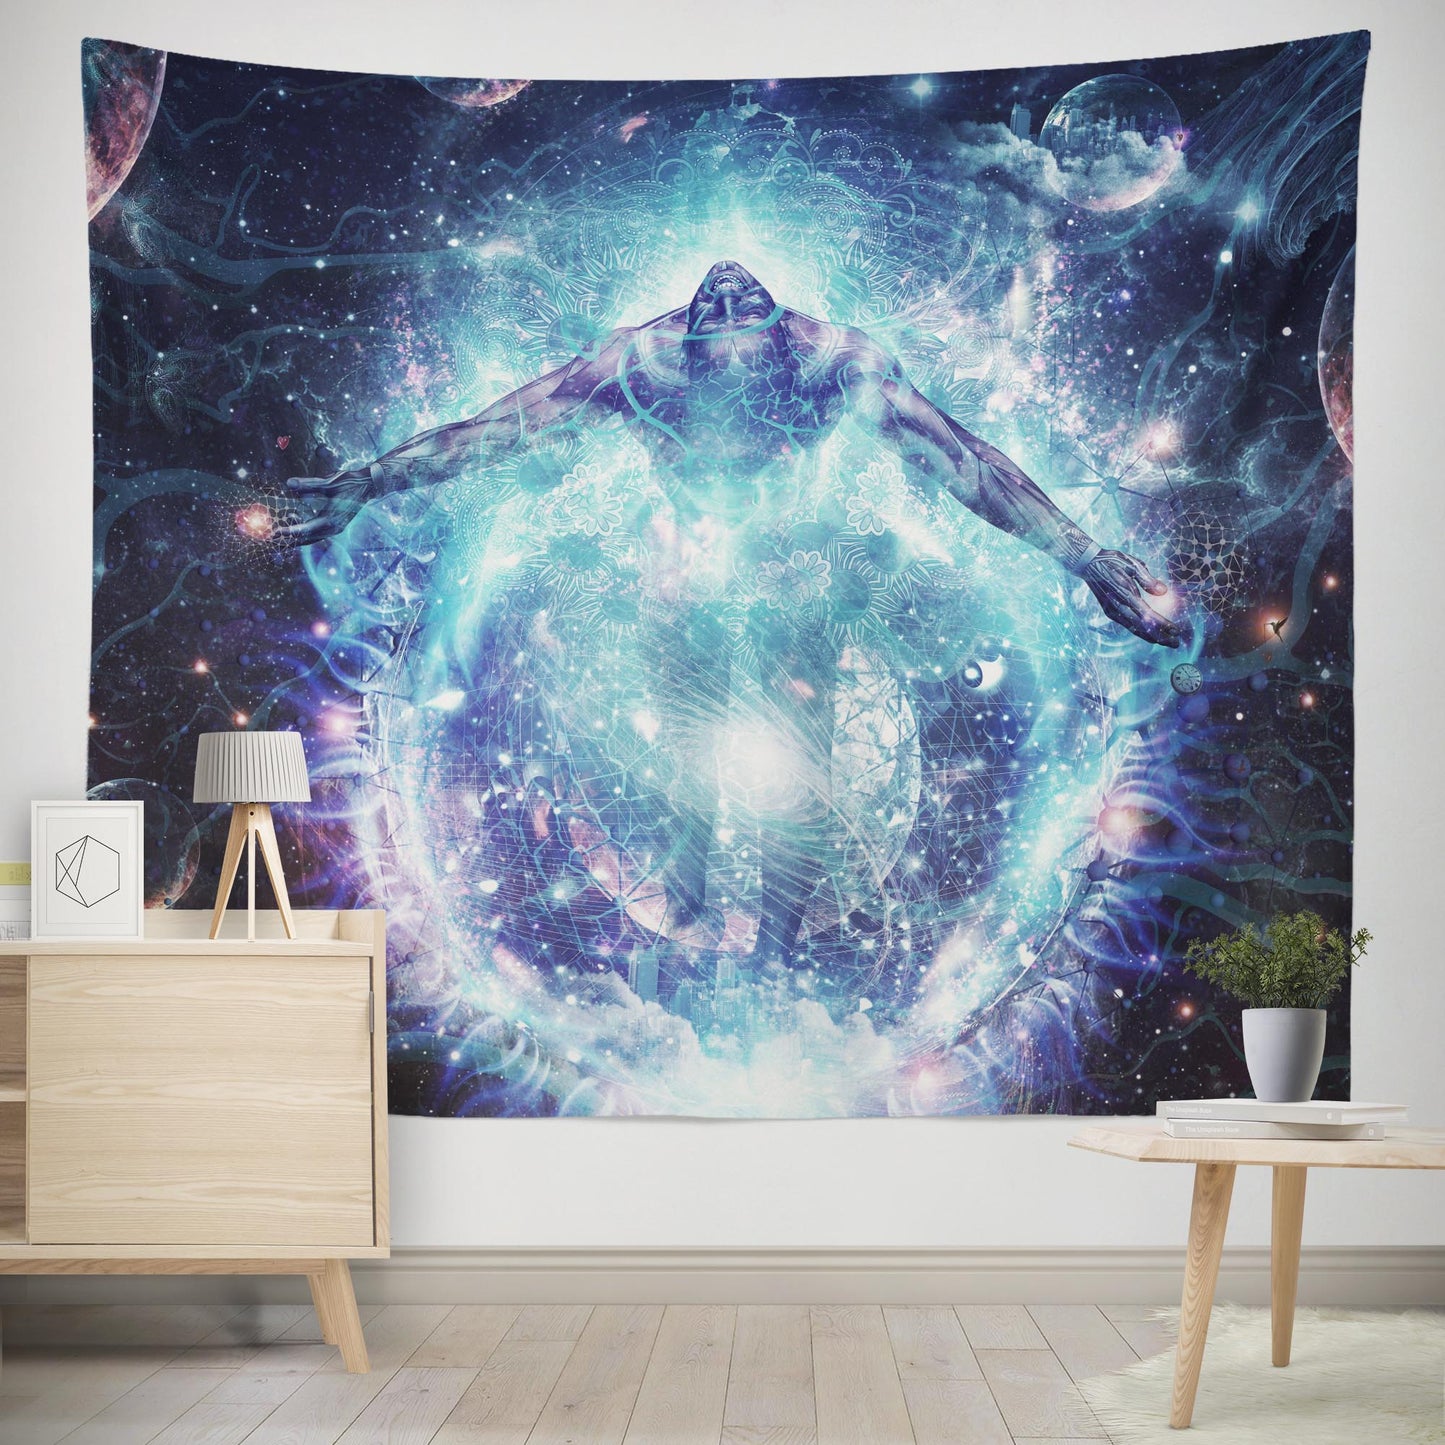 Large trippy wall tapestry of person ascending